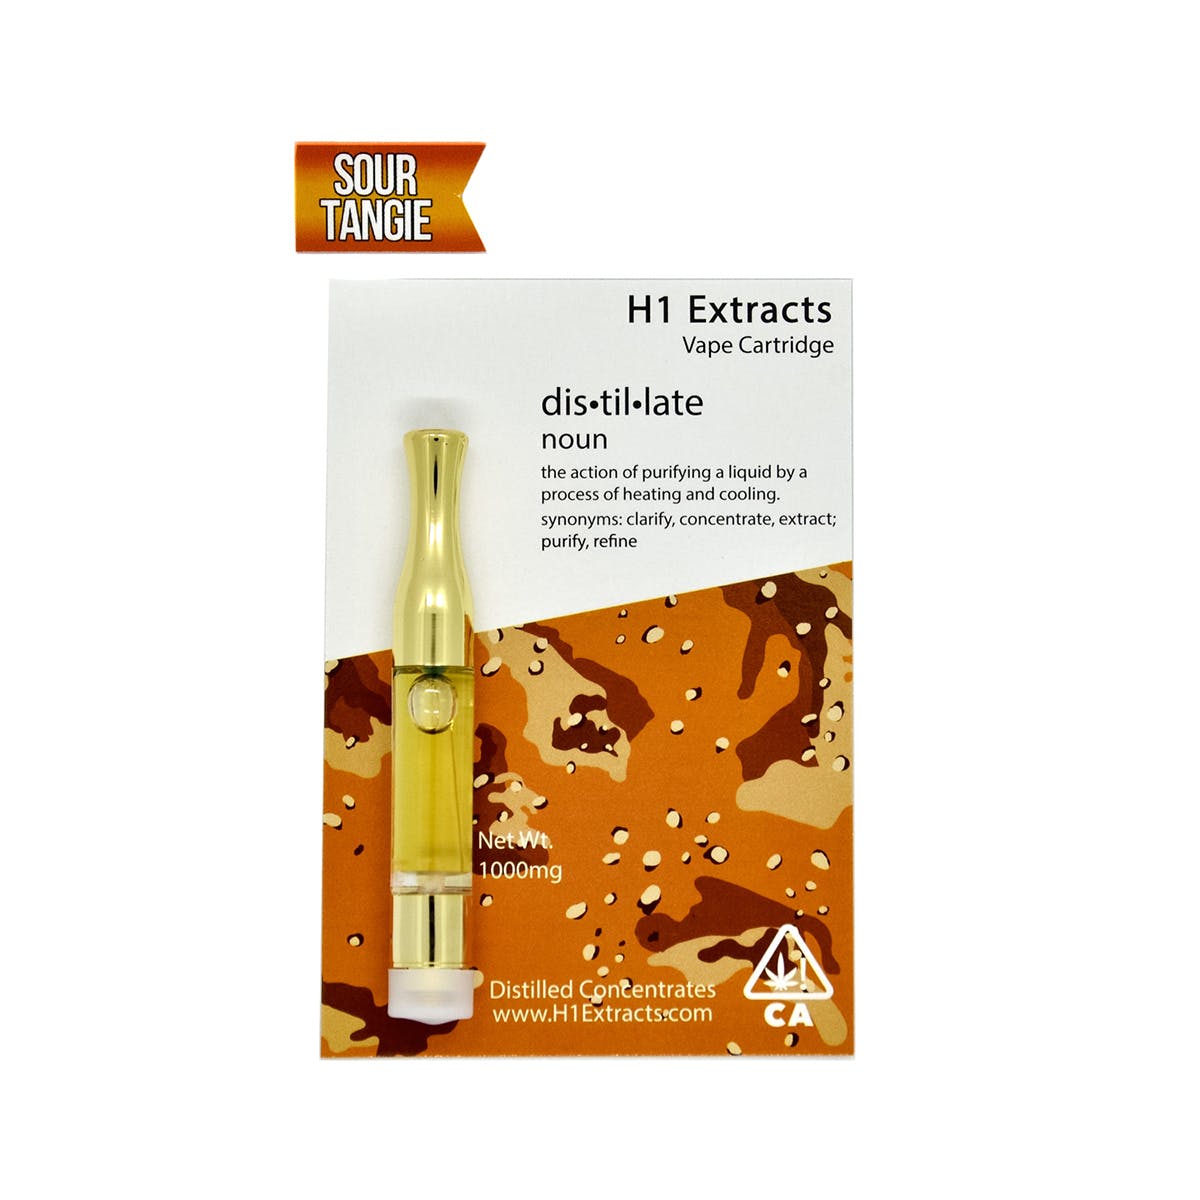 concentrate-h1-extracts-classic-sour-tangie-cartridge